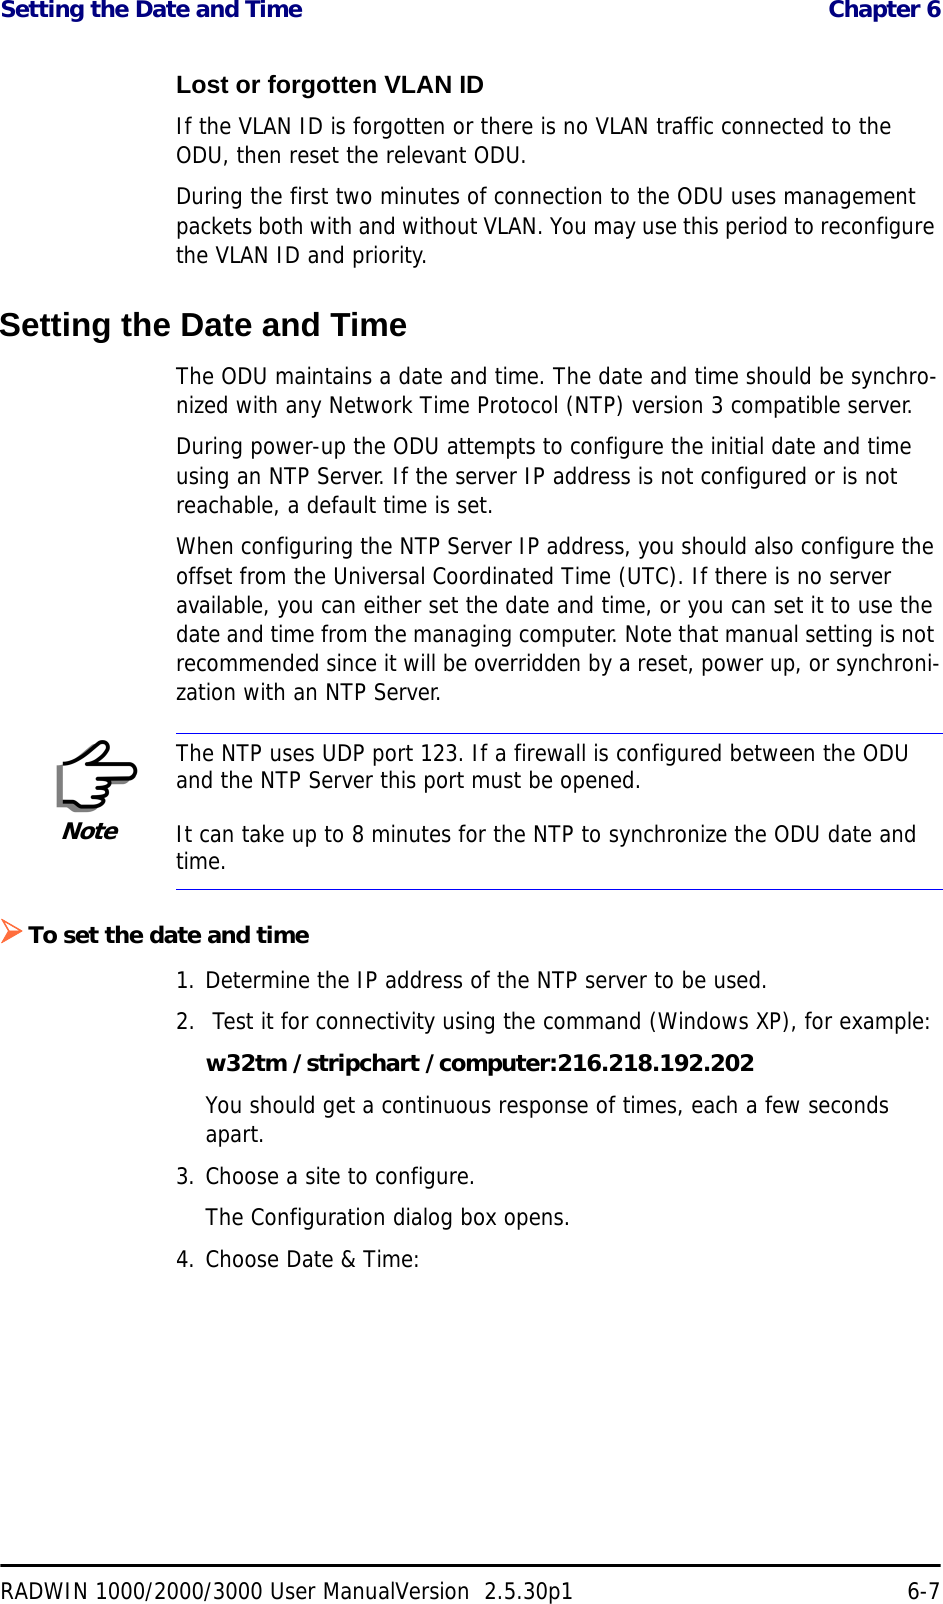 Setting the Date and Time  Chapter 6RADWIN 1000/2000/3000 User ManualVersion  2.5.30p1 6-7Lost or forgotten VLAN IDIf the VLAN ID is forgotten or there is no VLAN traffic connected to the ODU, then reset the relevant ODU.During the first two minutes of connection to the ODU uses management packets both with and without VLAN. You may use this period to reconfigure the VLAN ID and priority.Setting the Date and TimeThe ODU maintains a date and time. The date and time should be synchro-nized with any Network Time Protocol (NTP) version 3 compatible server.During power-up the ODU attempts to configure the initial date and time using an NTP Server. If the server IP address is not configured or is not reachable, a default time is set.When configuring the NTP Server IP address, you should also configure the offset from the Universal Coordinated Time (UTC). If there is no server available, you can either set the date and time, or you can set it to use the date and time from the managing computer. Note that manual setting is not recommended since it will be overridden by a reset, power up, or synchroni-zation with an NTP Server.¾To set the date and time1. Determine the IP address of the NTP server to be used.2.  Test it for connectivity using the command (Windows XP), for example:w32tm /stripchart /computer:216.218.192.202You should get a continuous response of times, each a few seconds apart.3. Choose a site to configure.The Configuration dialog box opens.4. Choose Date &amp; Time:NoteThe NTP uses UDP port 123. If a firewall is configured between the ODU and the NTP Server this port must be opened.It can take up to 8 minutes for the NTP to synchronize the ODU date and time.